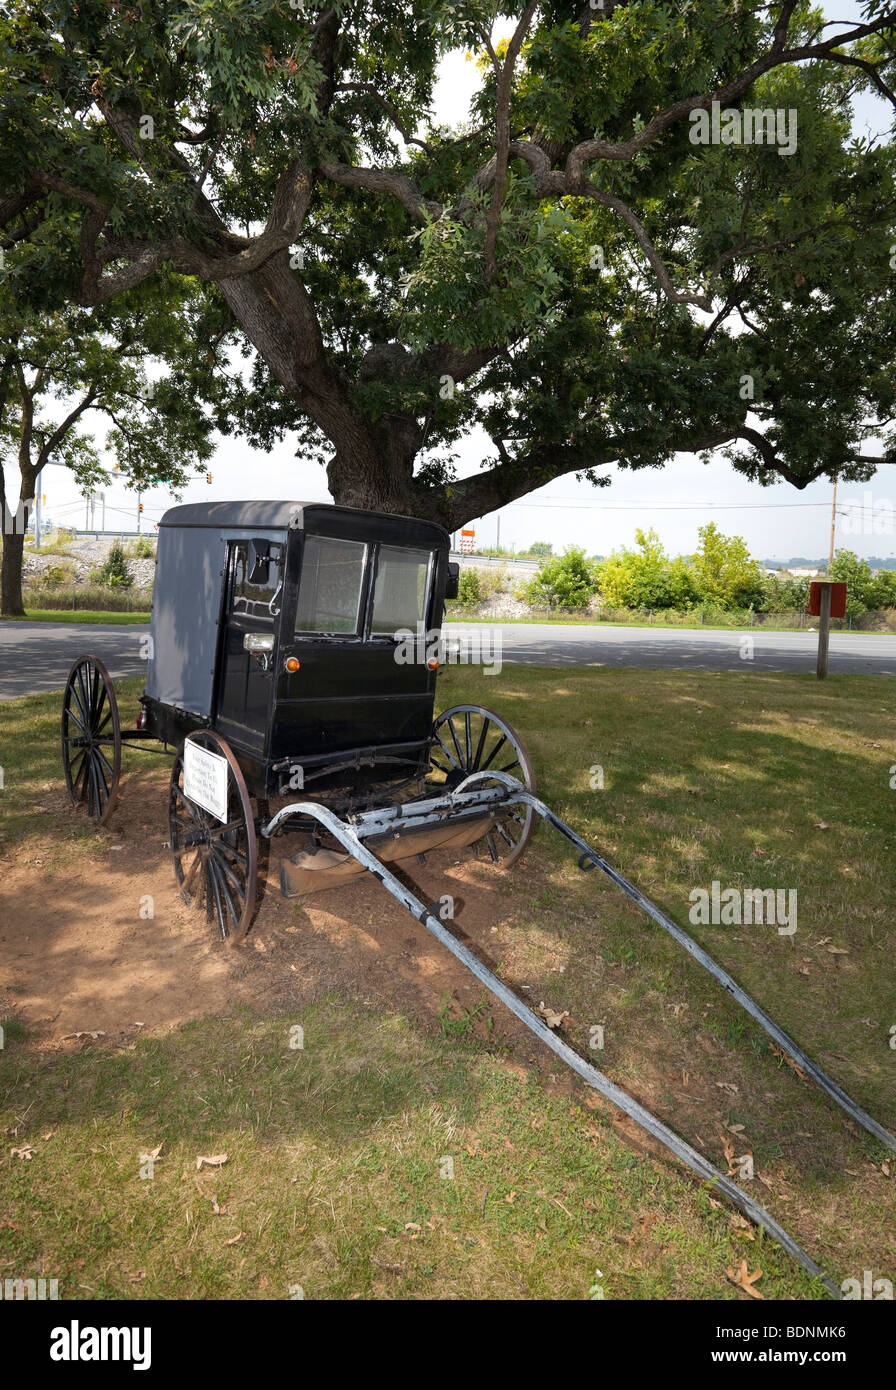 Buggy Amish, New York, Pennsylvania Dutch Country, USA Banque D'Images